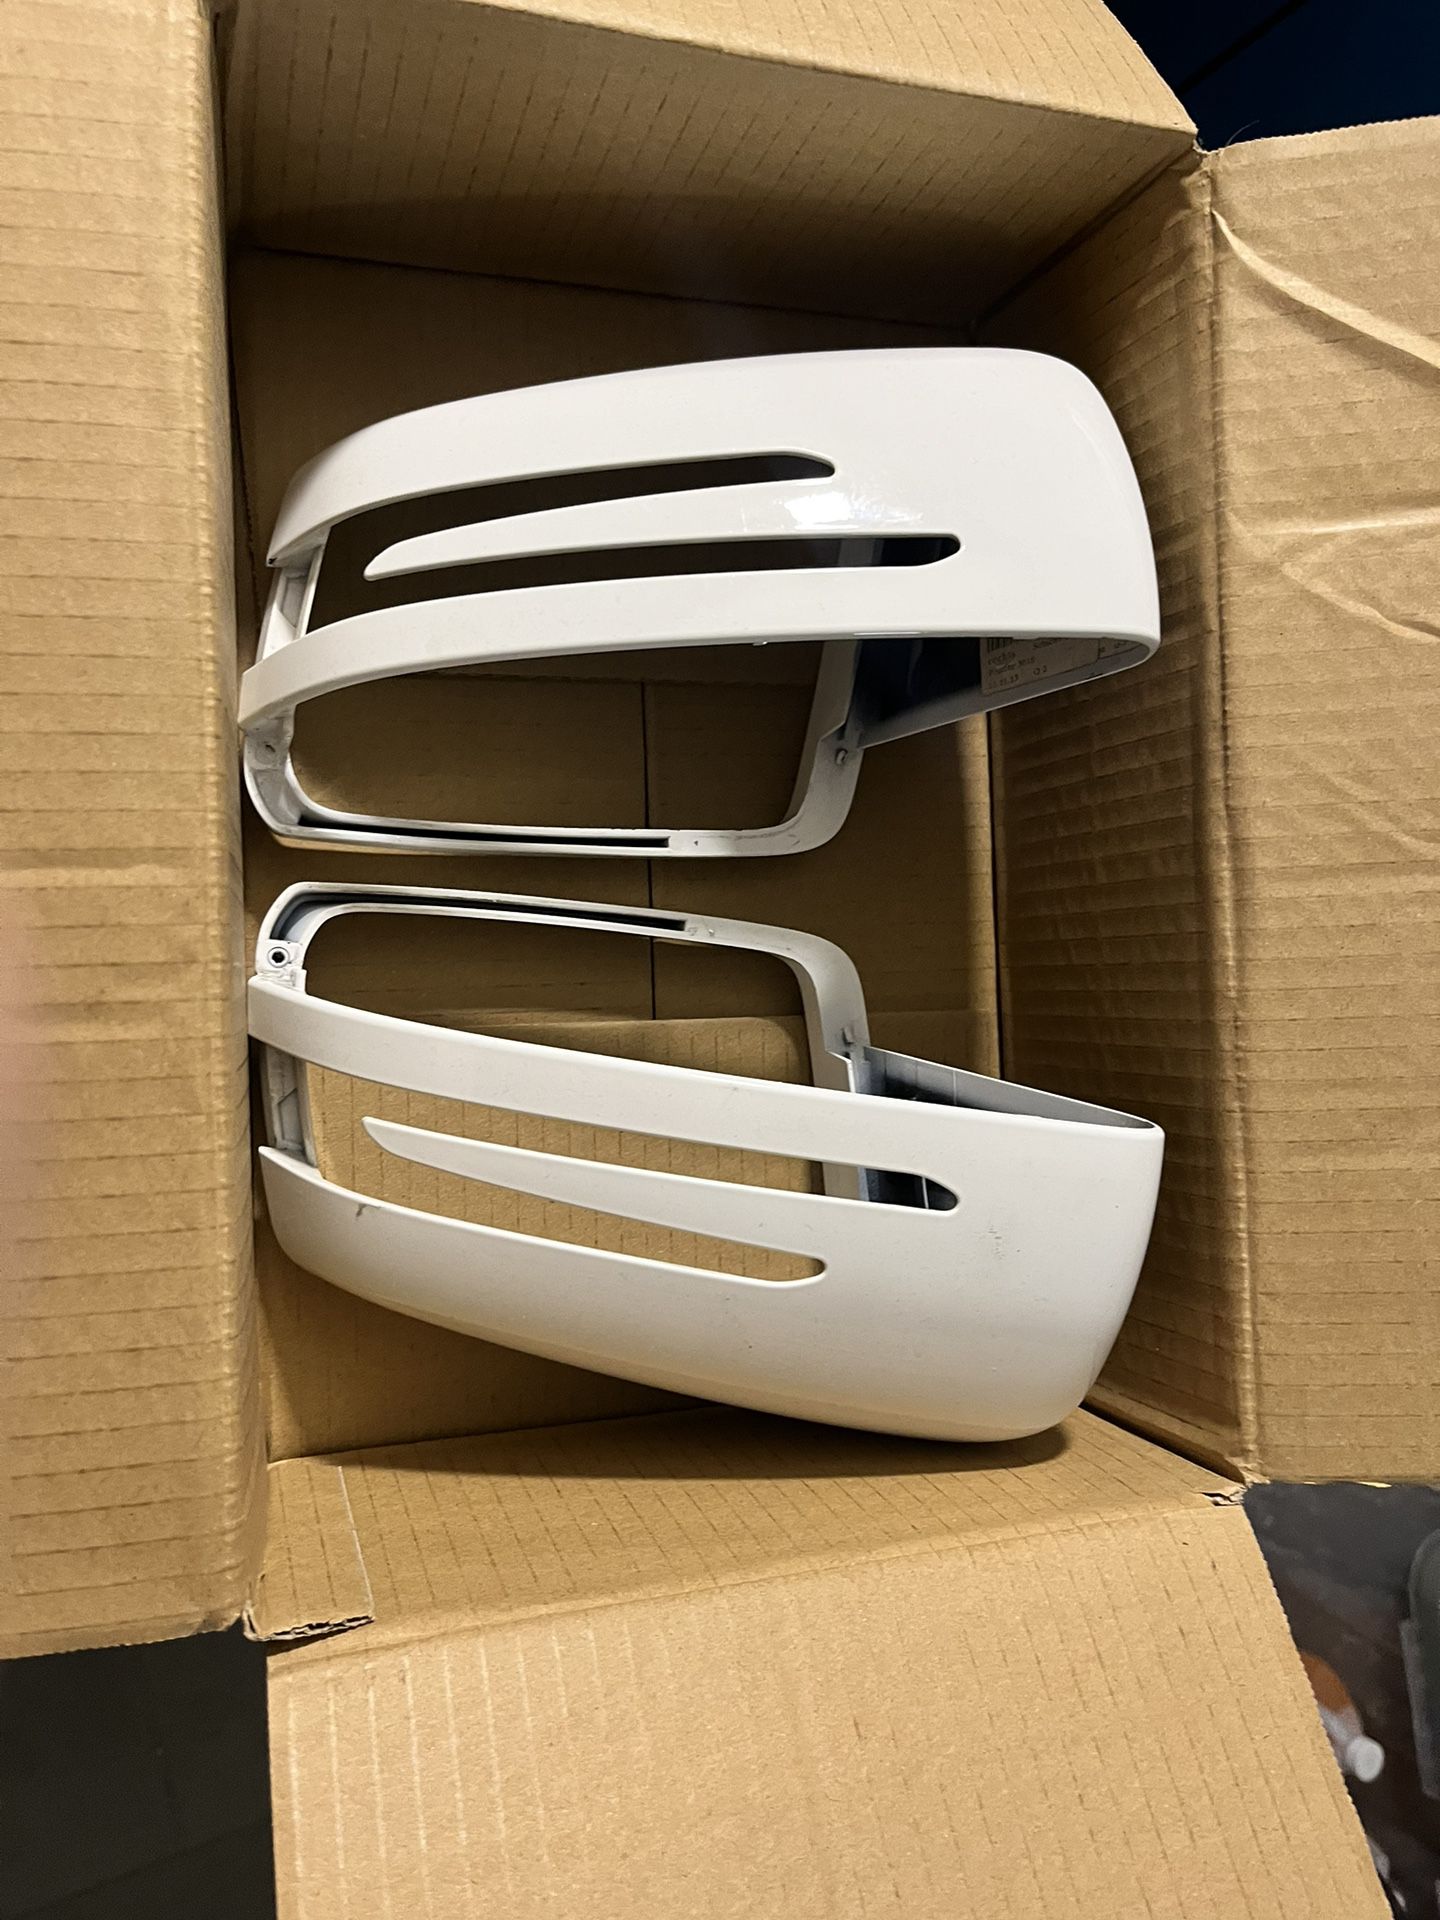 Mercedes OEM mirror caps and spoiler for E-Class